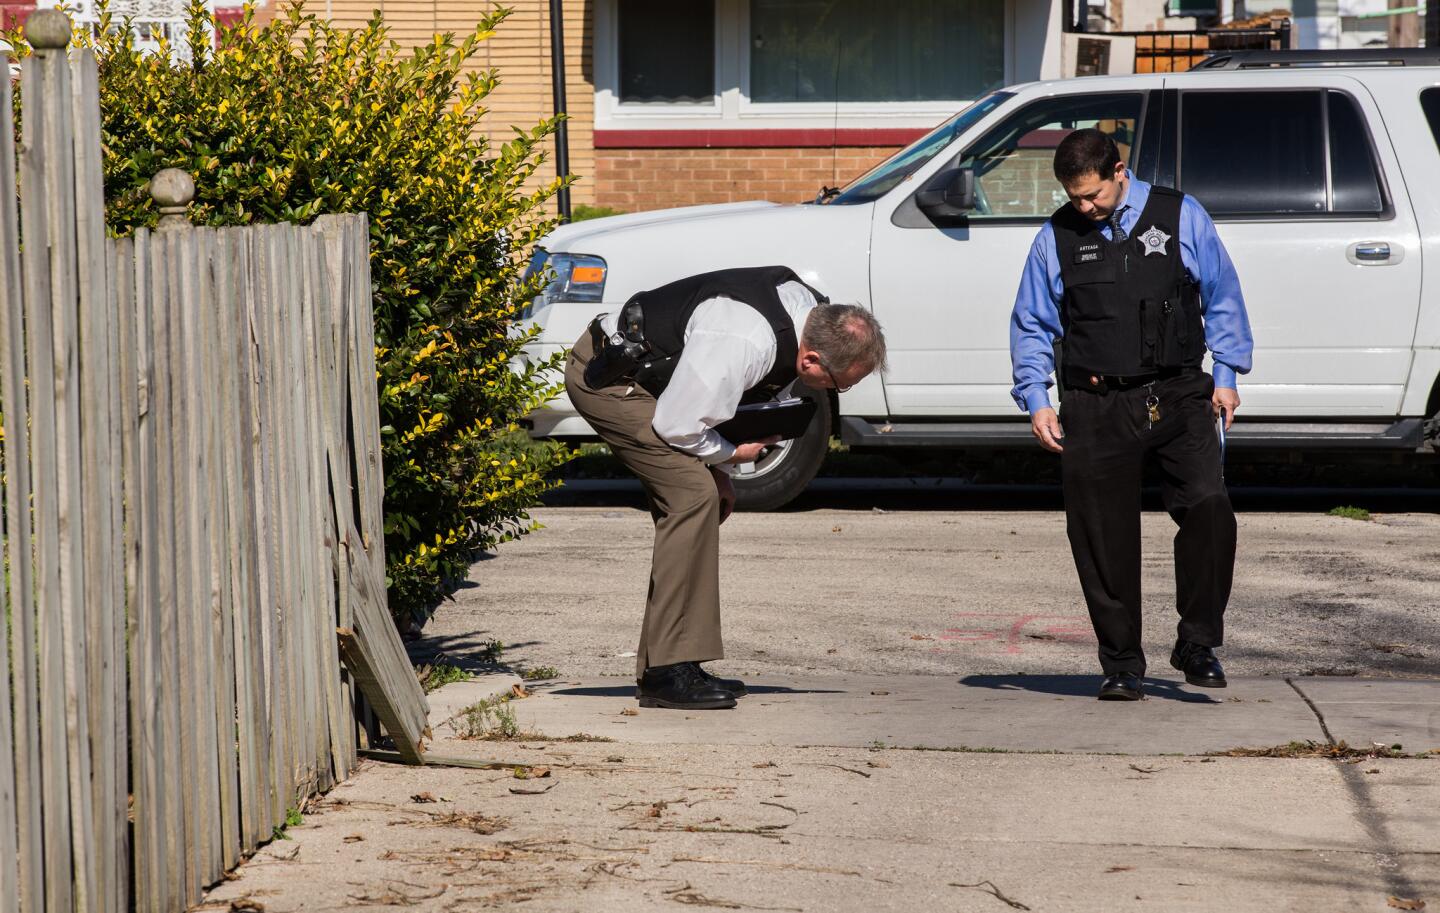 Chicago police officers take a close look at the ground on Nov. 3, 2015, near the alley at 80th Street and South Damen Avenue where Tyshawn Lee, 9, was fatally shot on a day earlier.